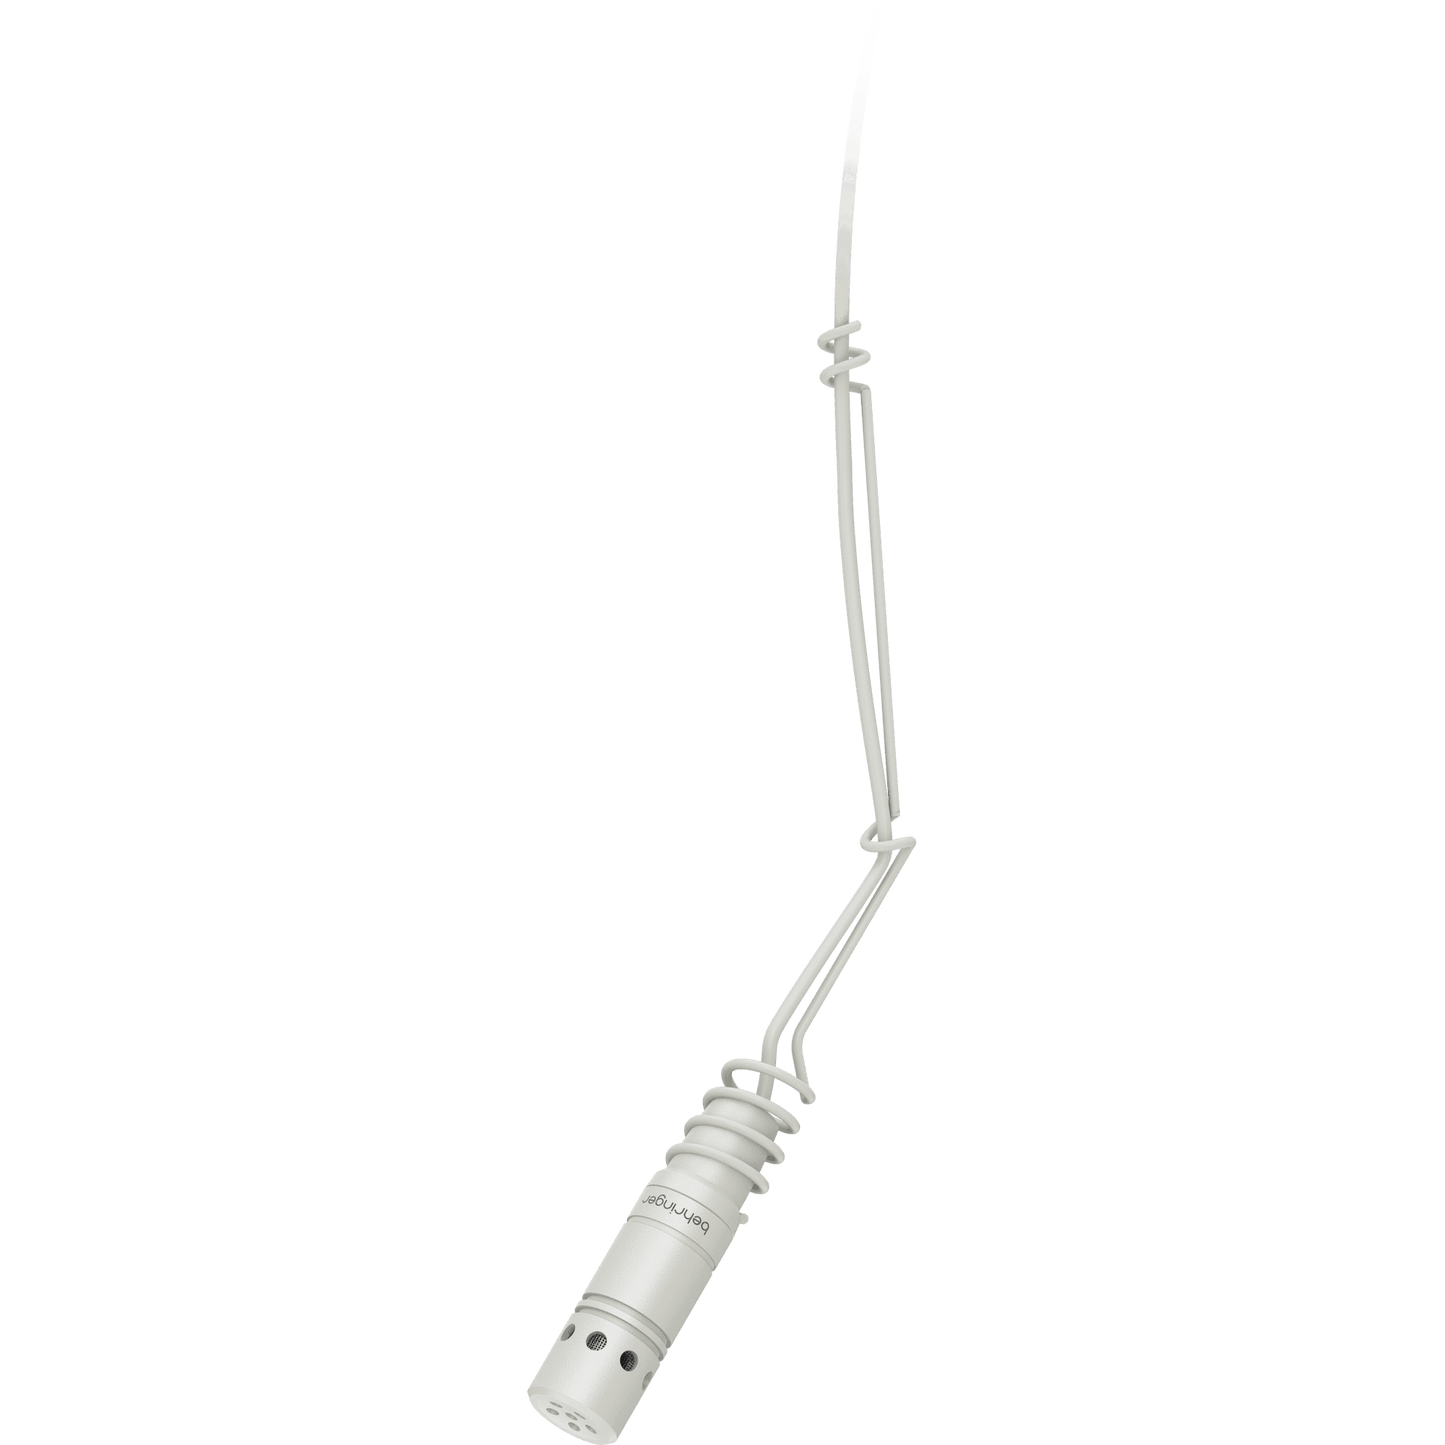 Behringer HM50 Hanging Microphone (White)